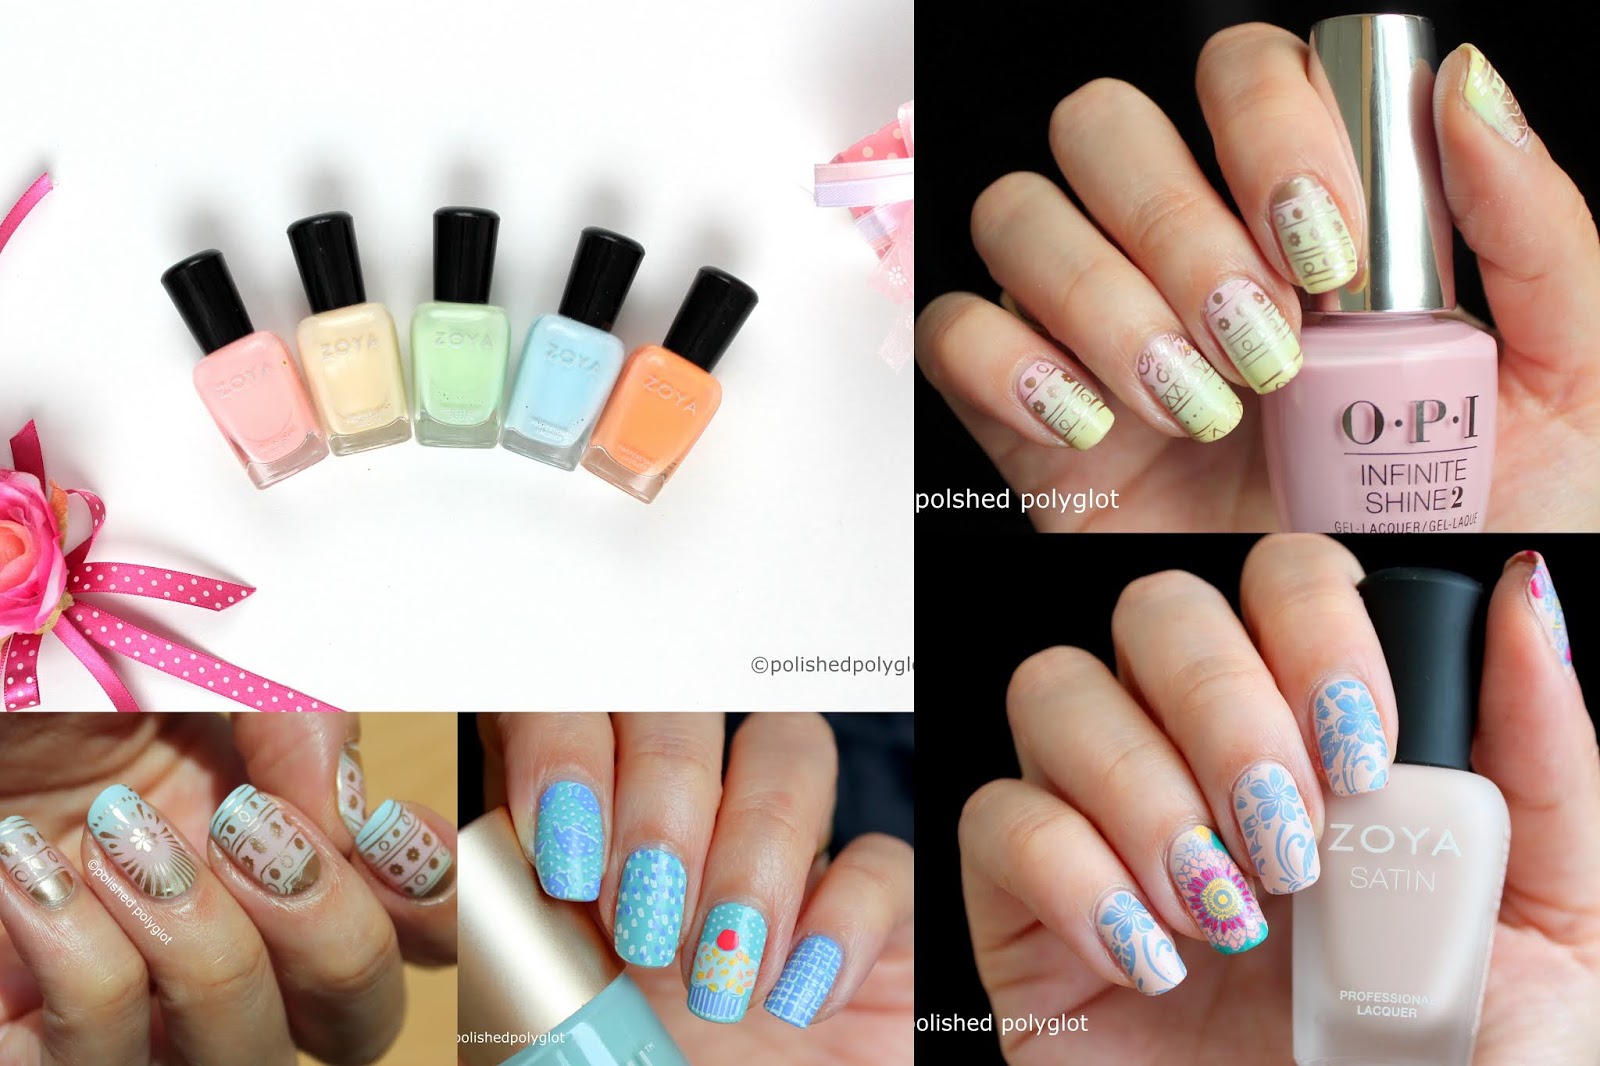 2. 10 Gorgeous Pastel Nail Colors to Try - wide 6